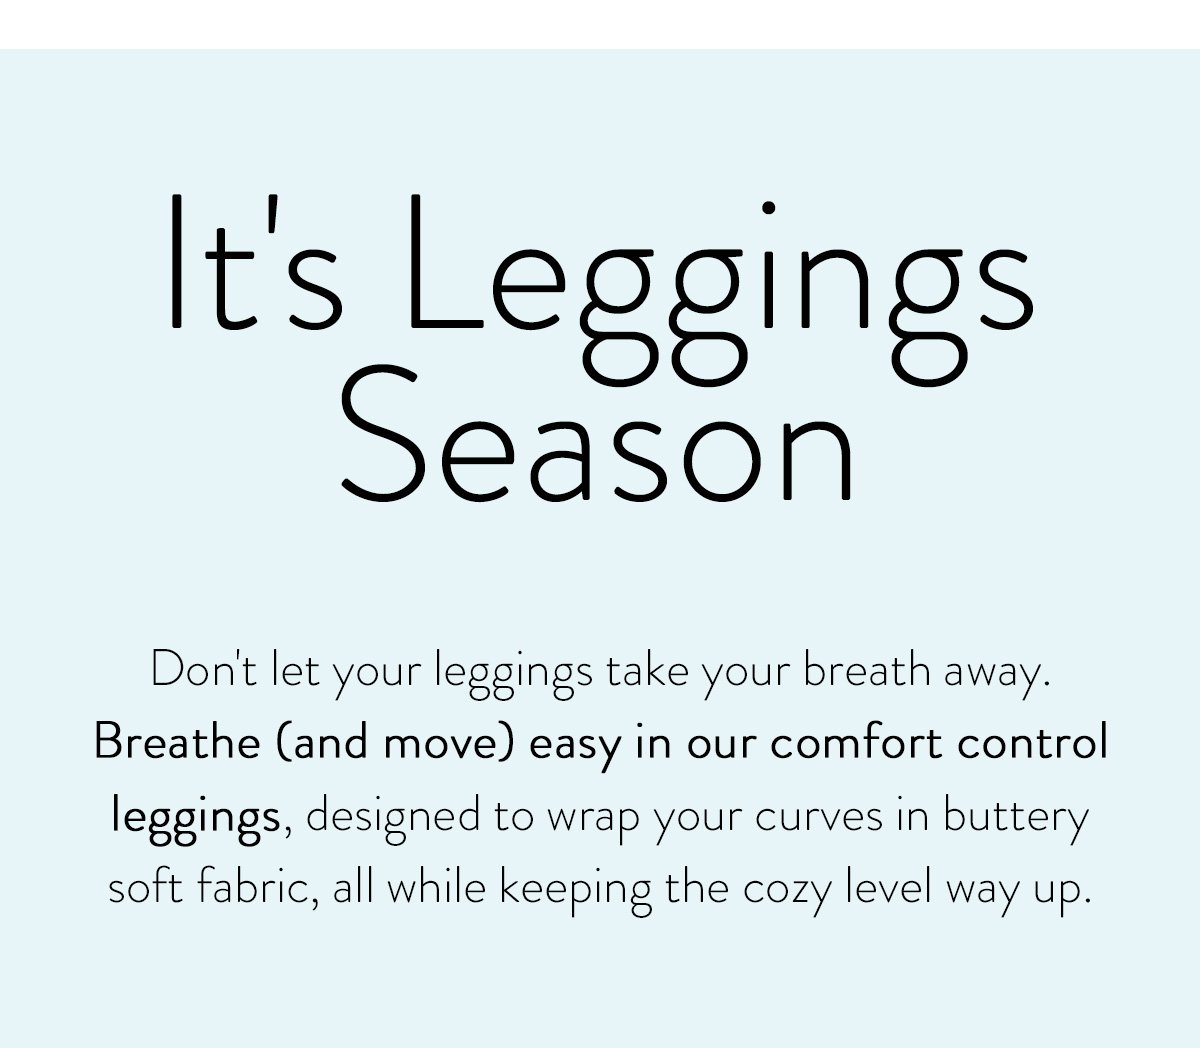 It's Leggings Season / Don't let your leggings take your breath away. Breathe (and move) easy in our comfort control leggings, designed to wrap your curves in buttery soft fabric, all while keeping the cozy level way up.